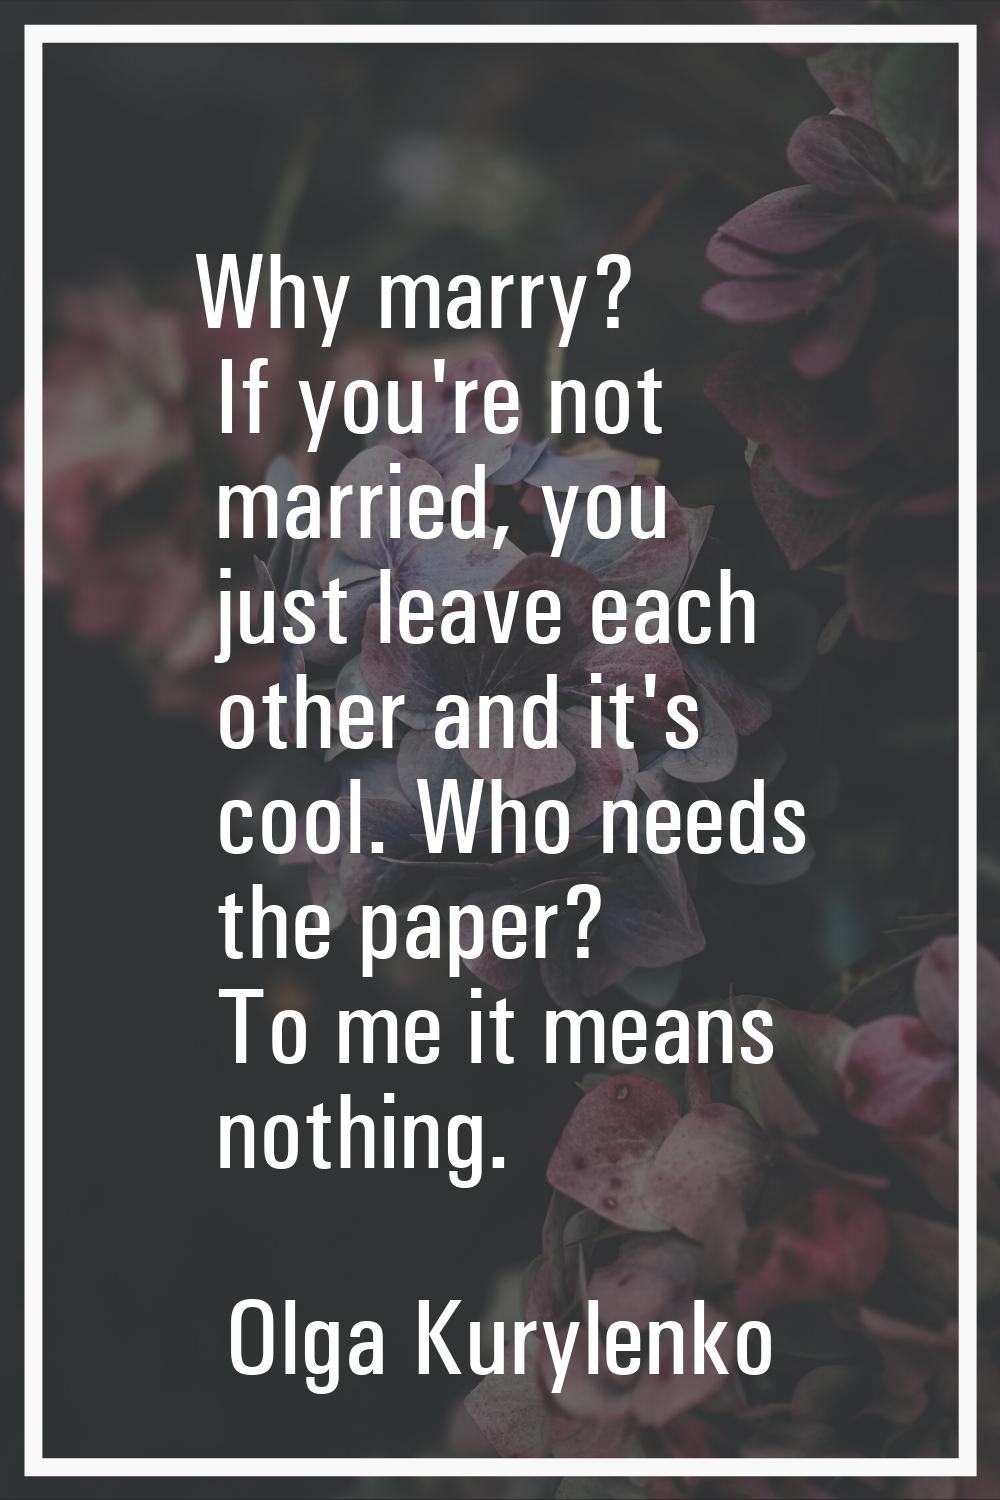 Why marry? If you're not married, you just leave each other and it's cool. Who needs the paper? To 